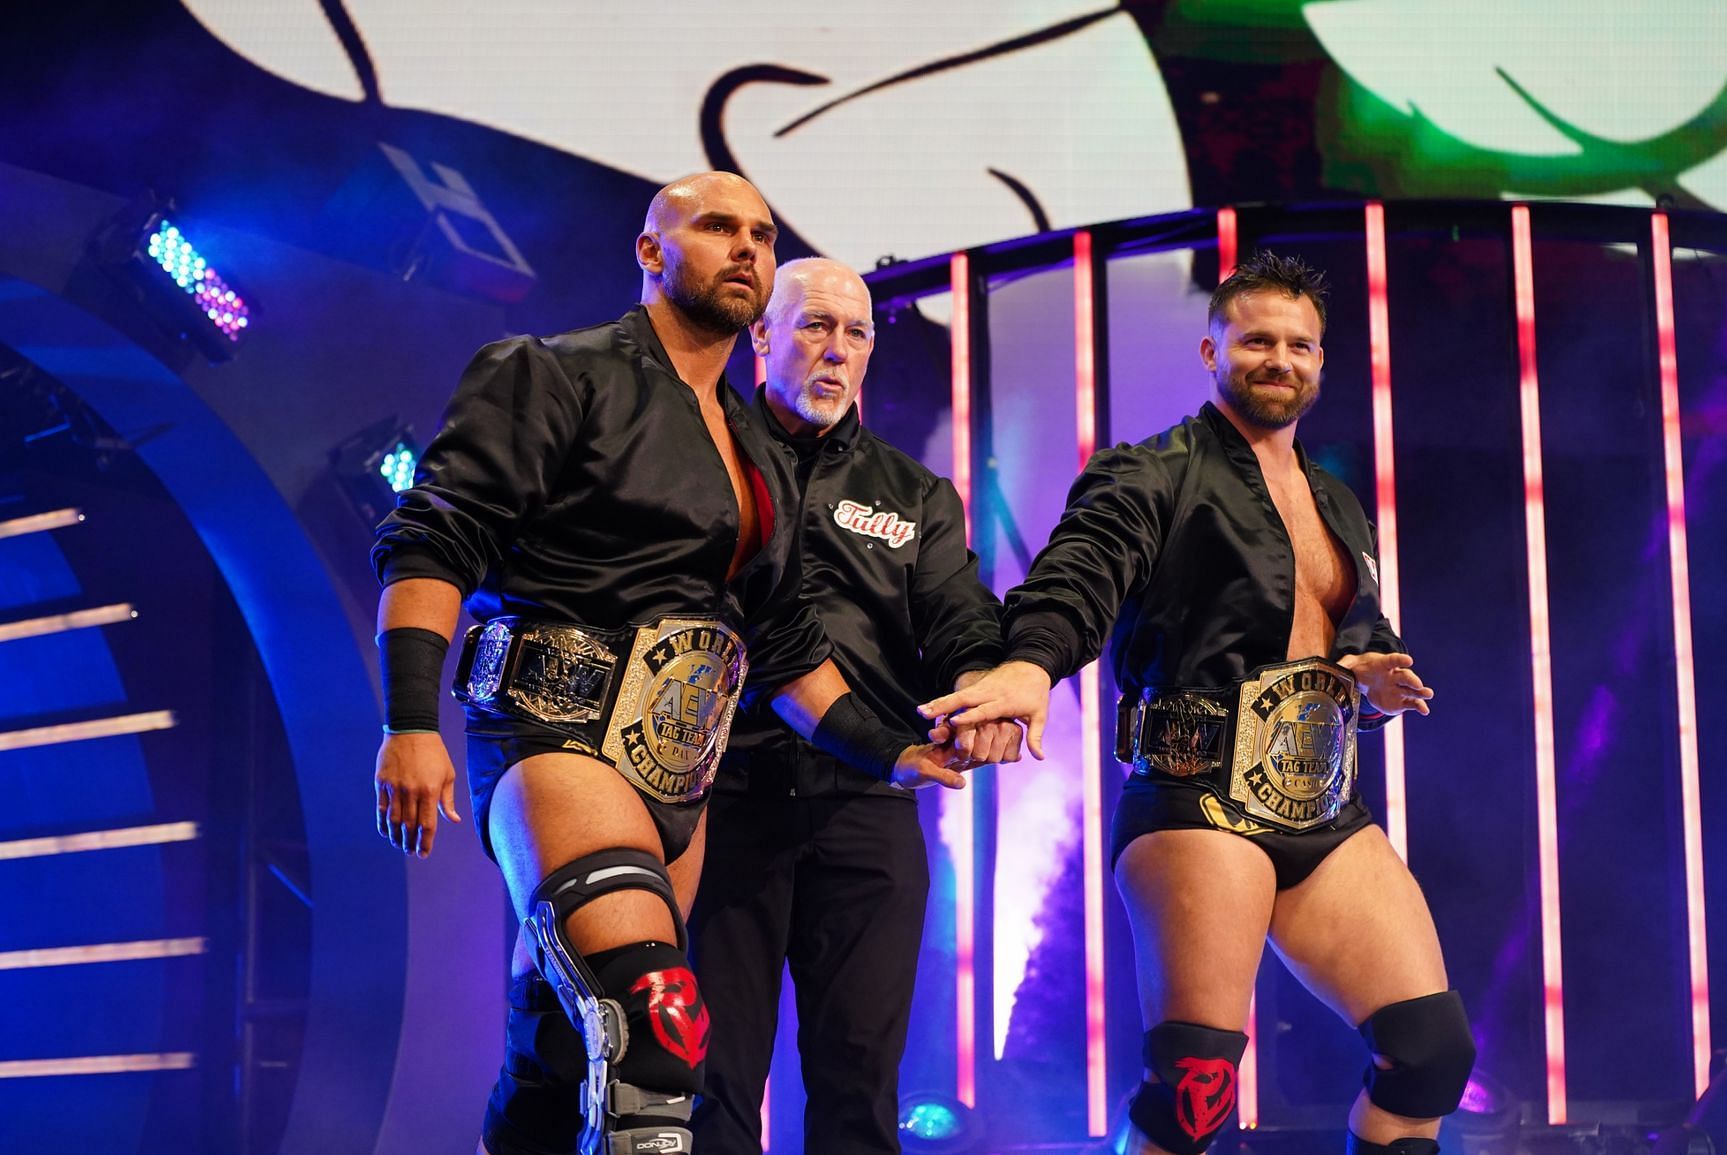 AEW tag team FTR is the only tag team in history to win both AEW and WWE tag titles